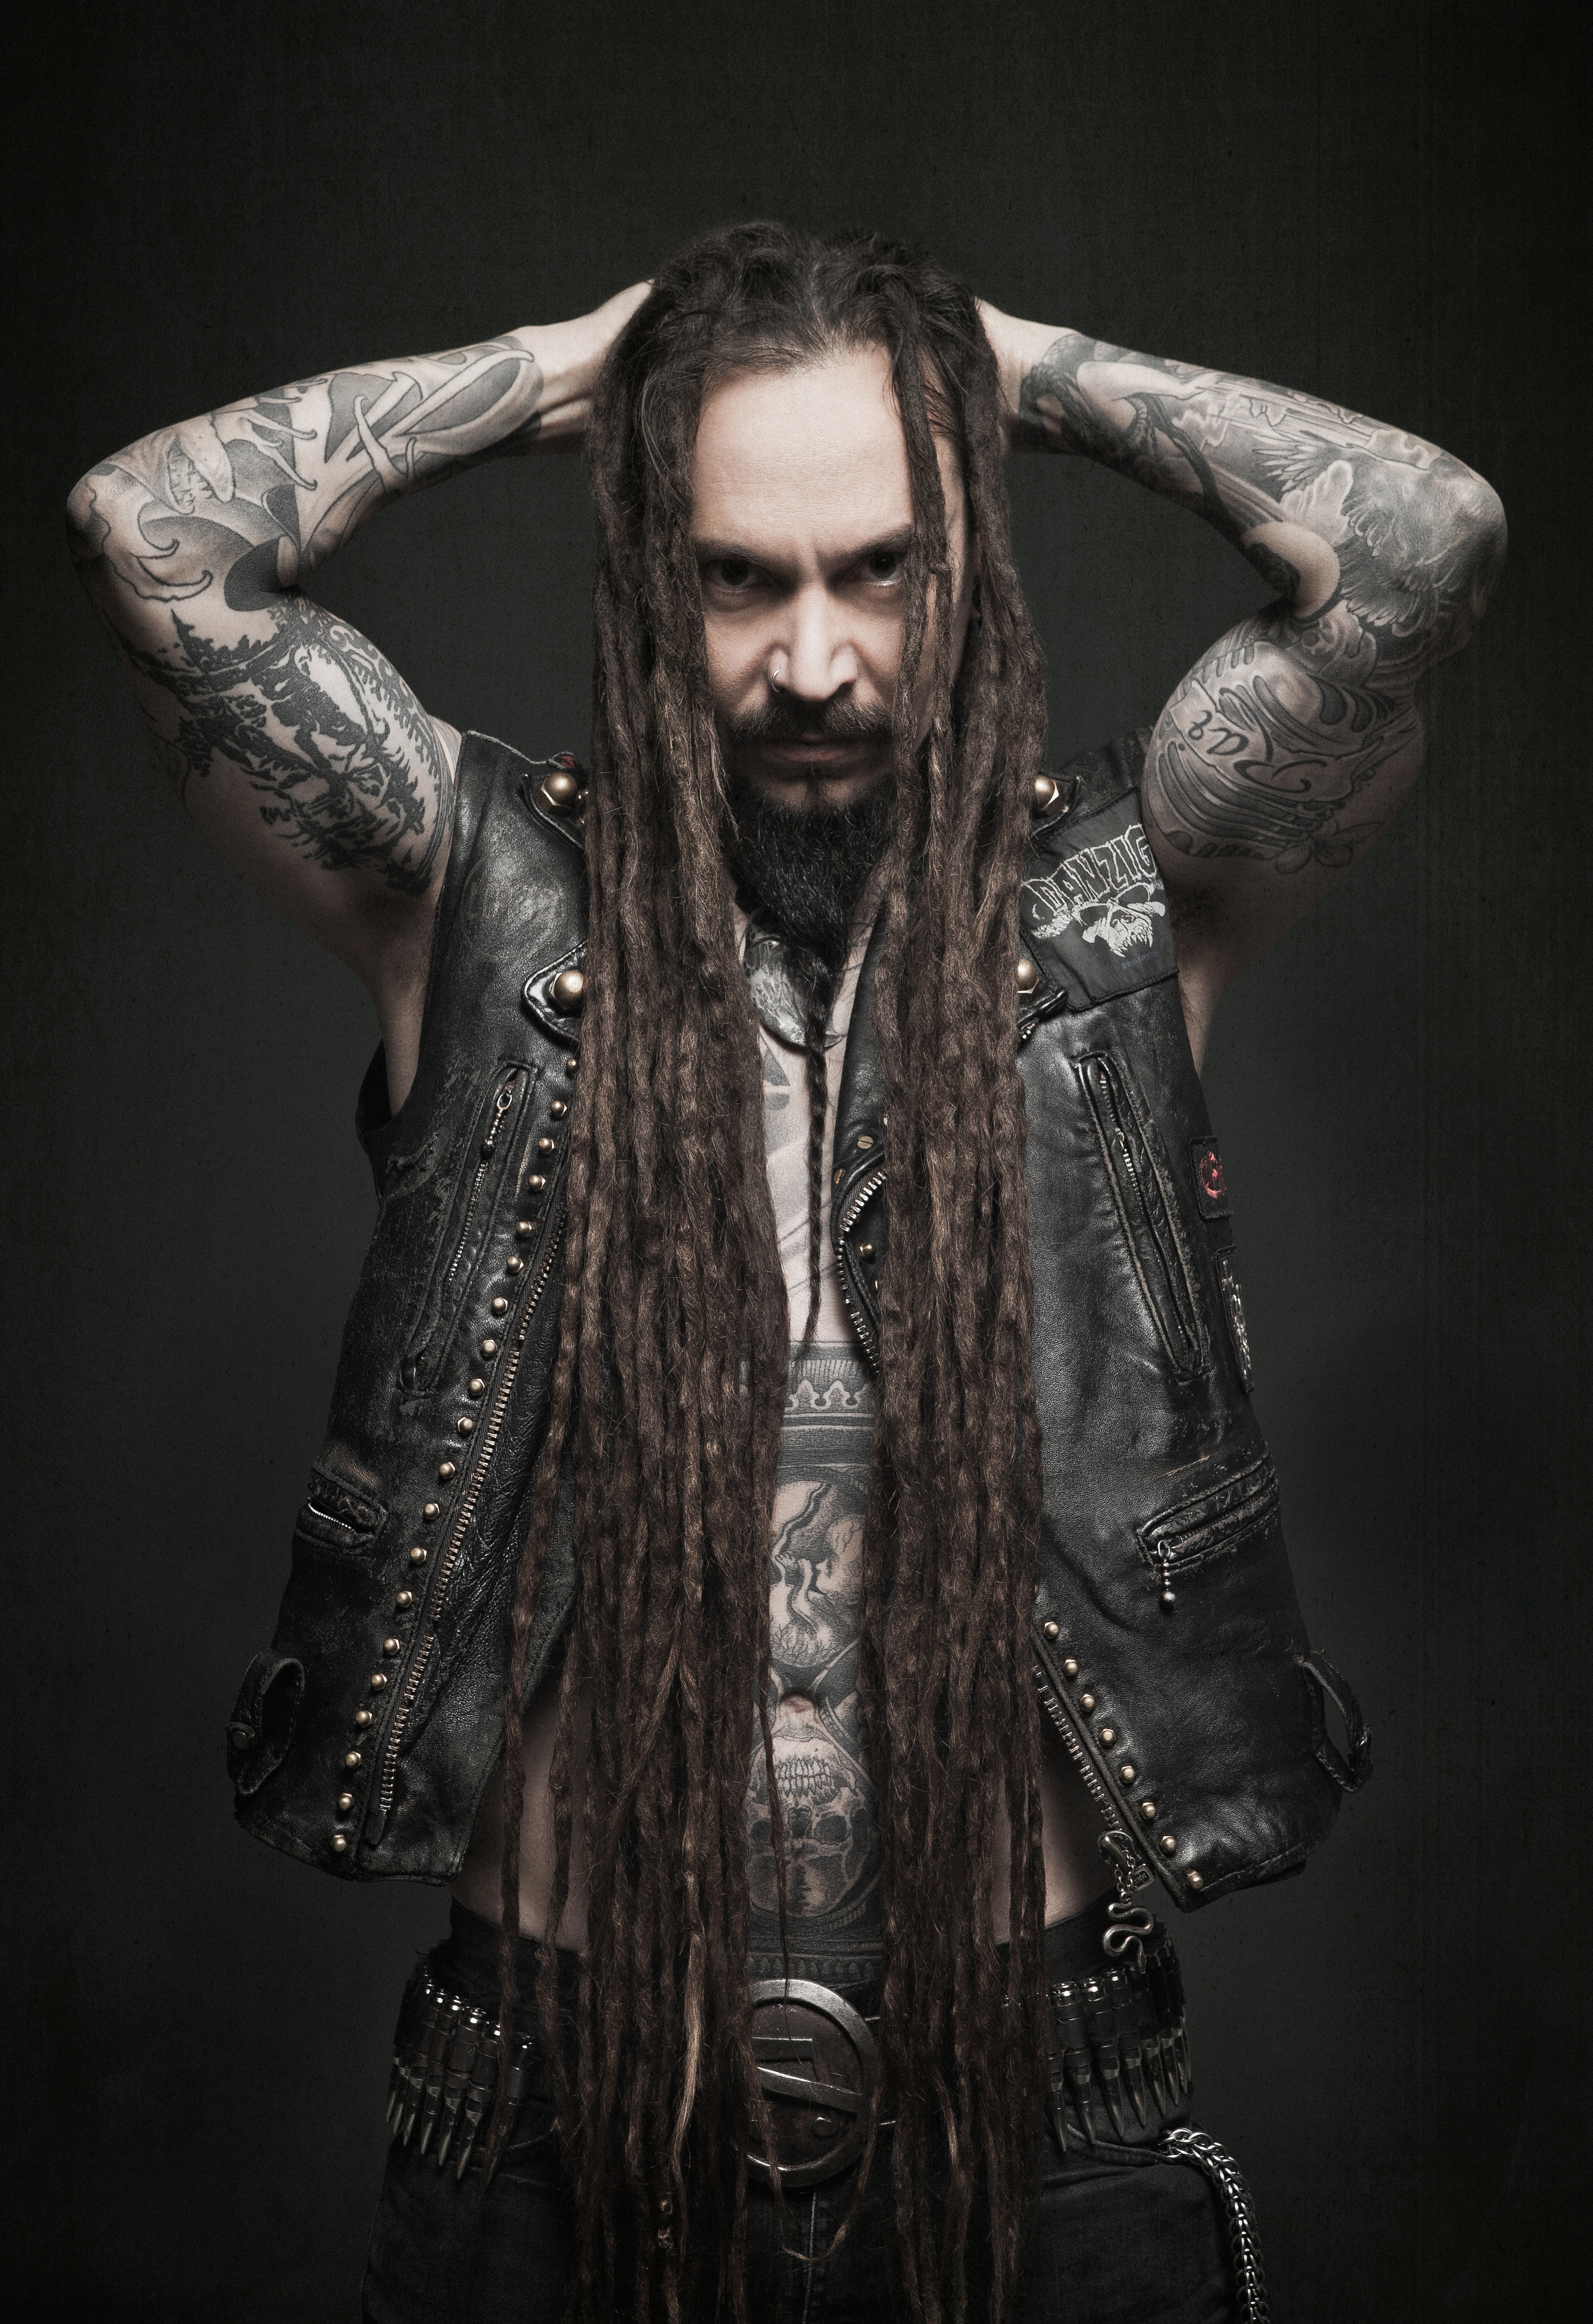 HQ Amorphis Wallpapers | File 11409.88Kb